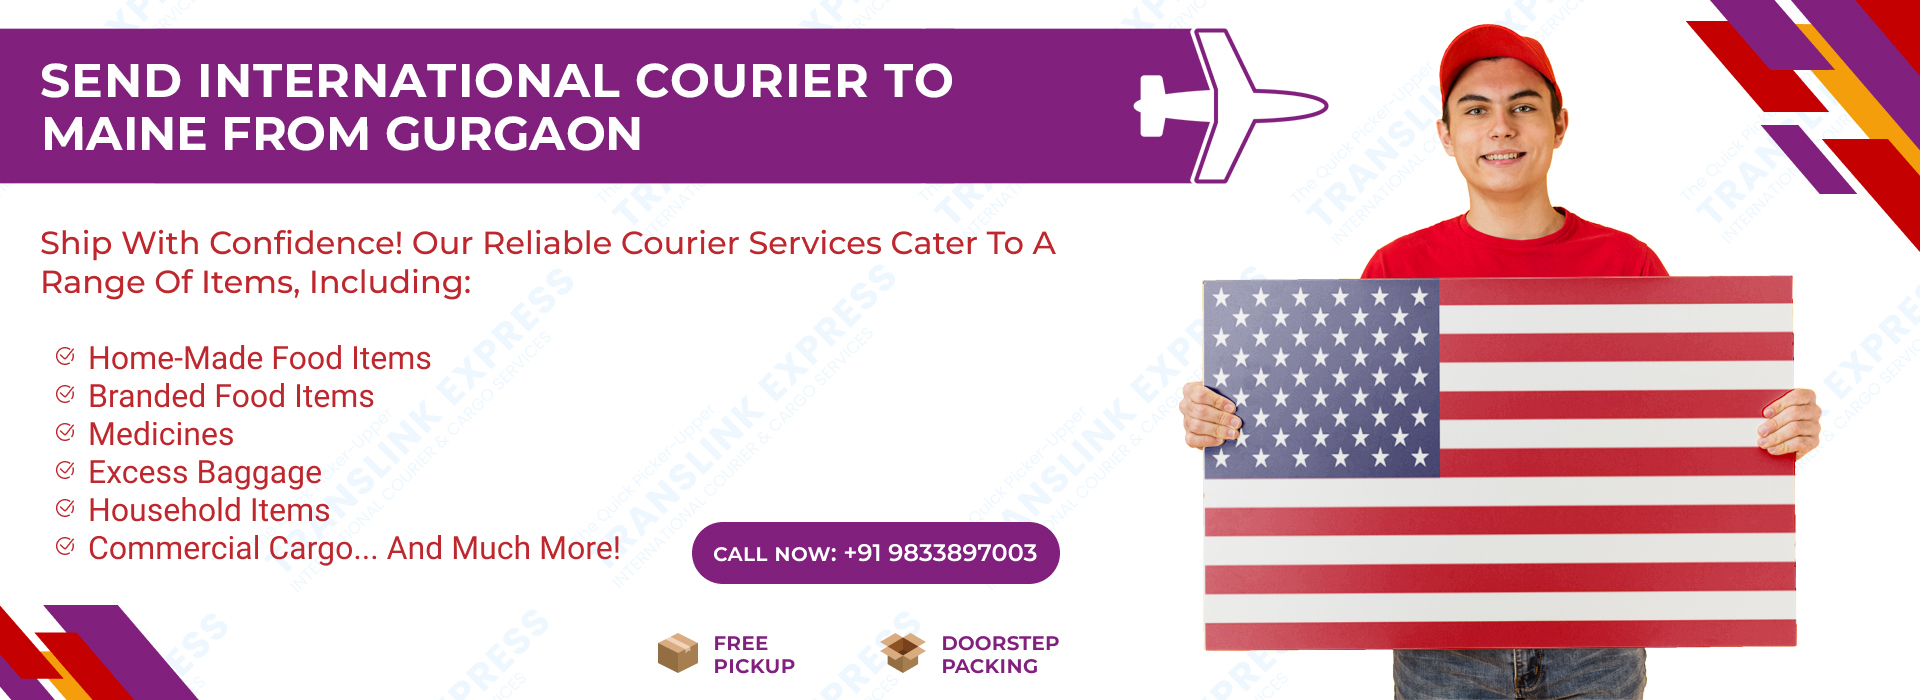 Courier to Maine From Gurgaon